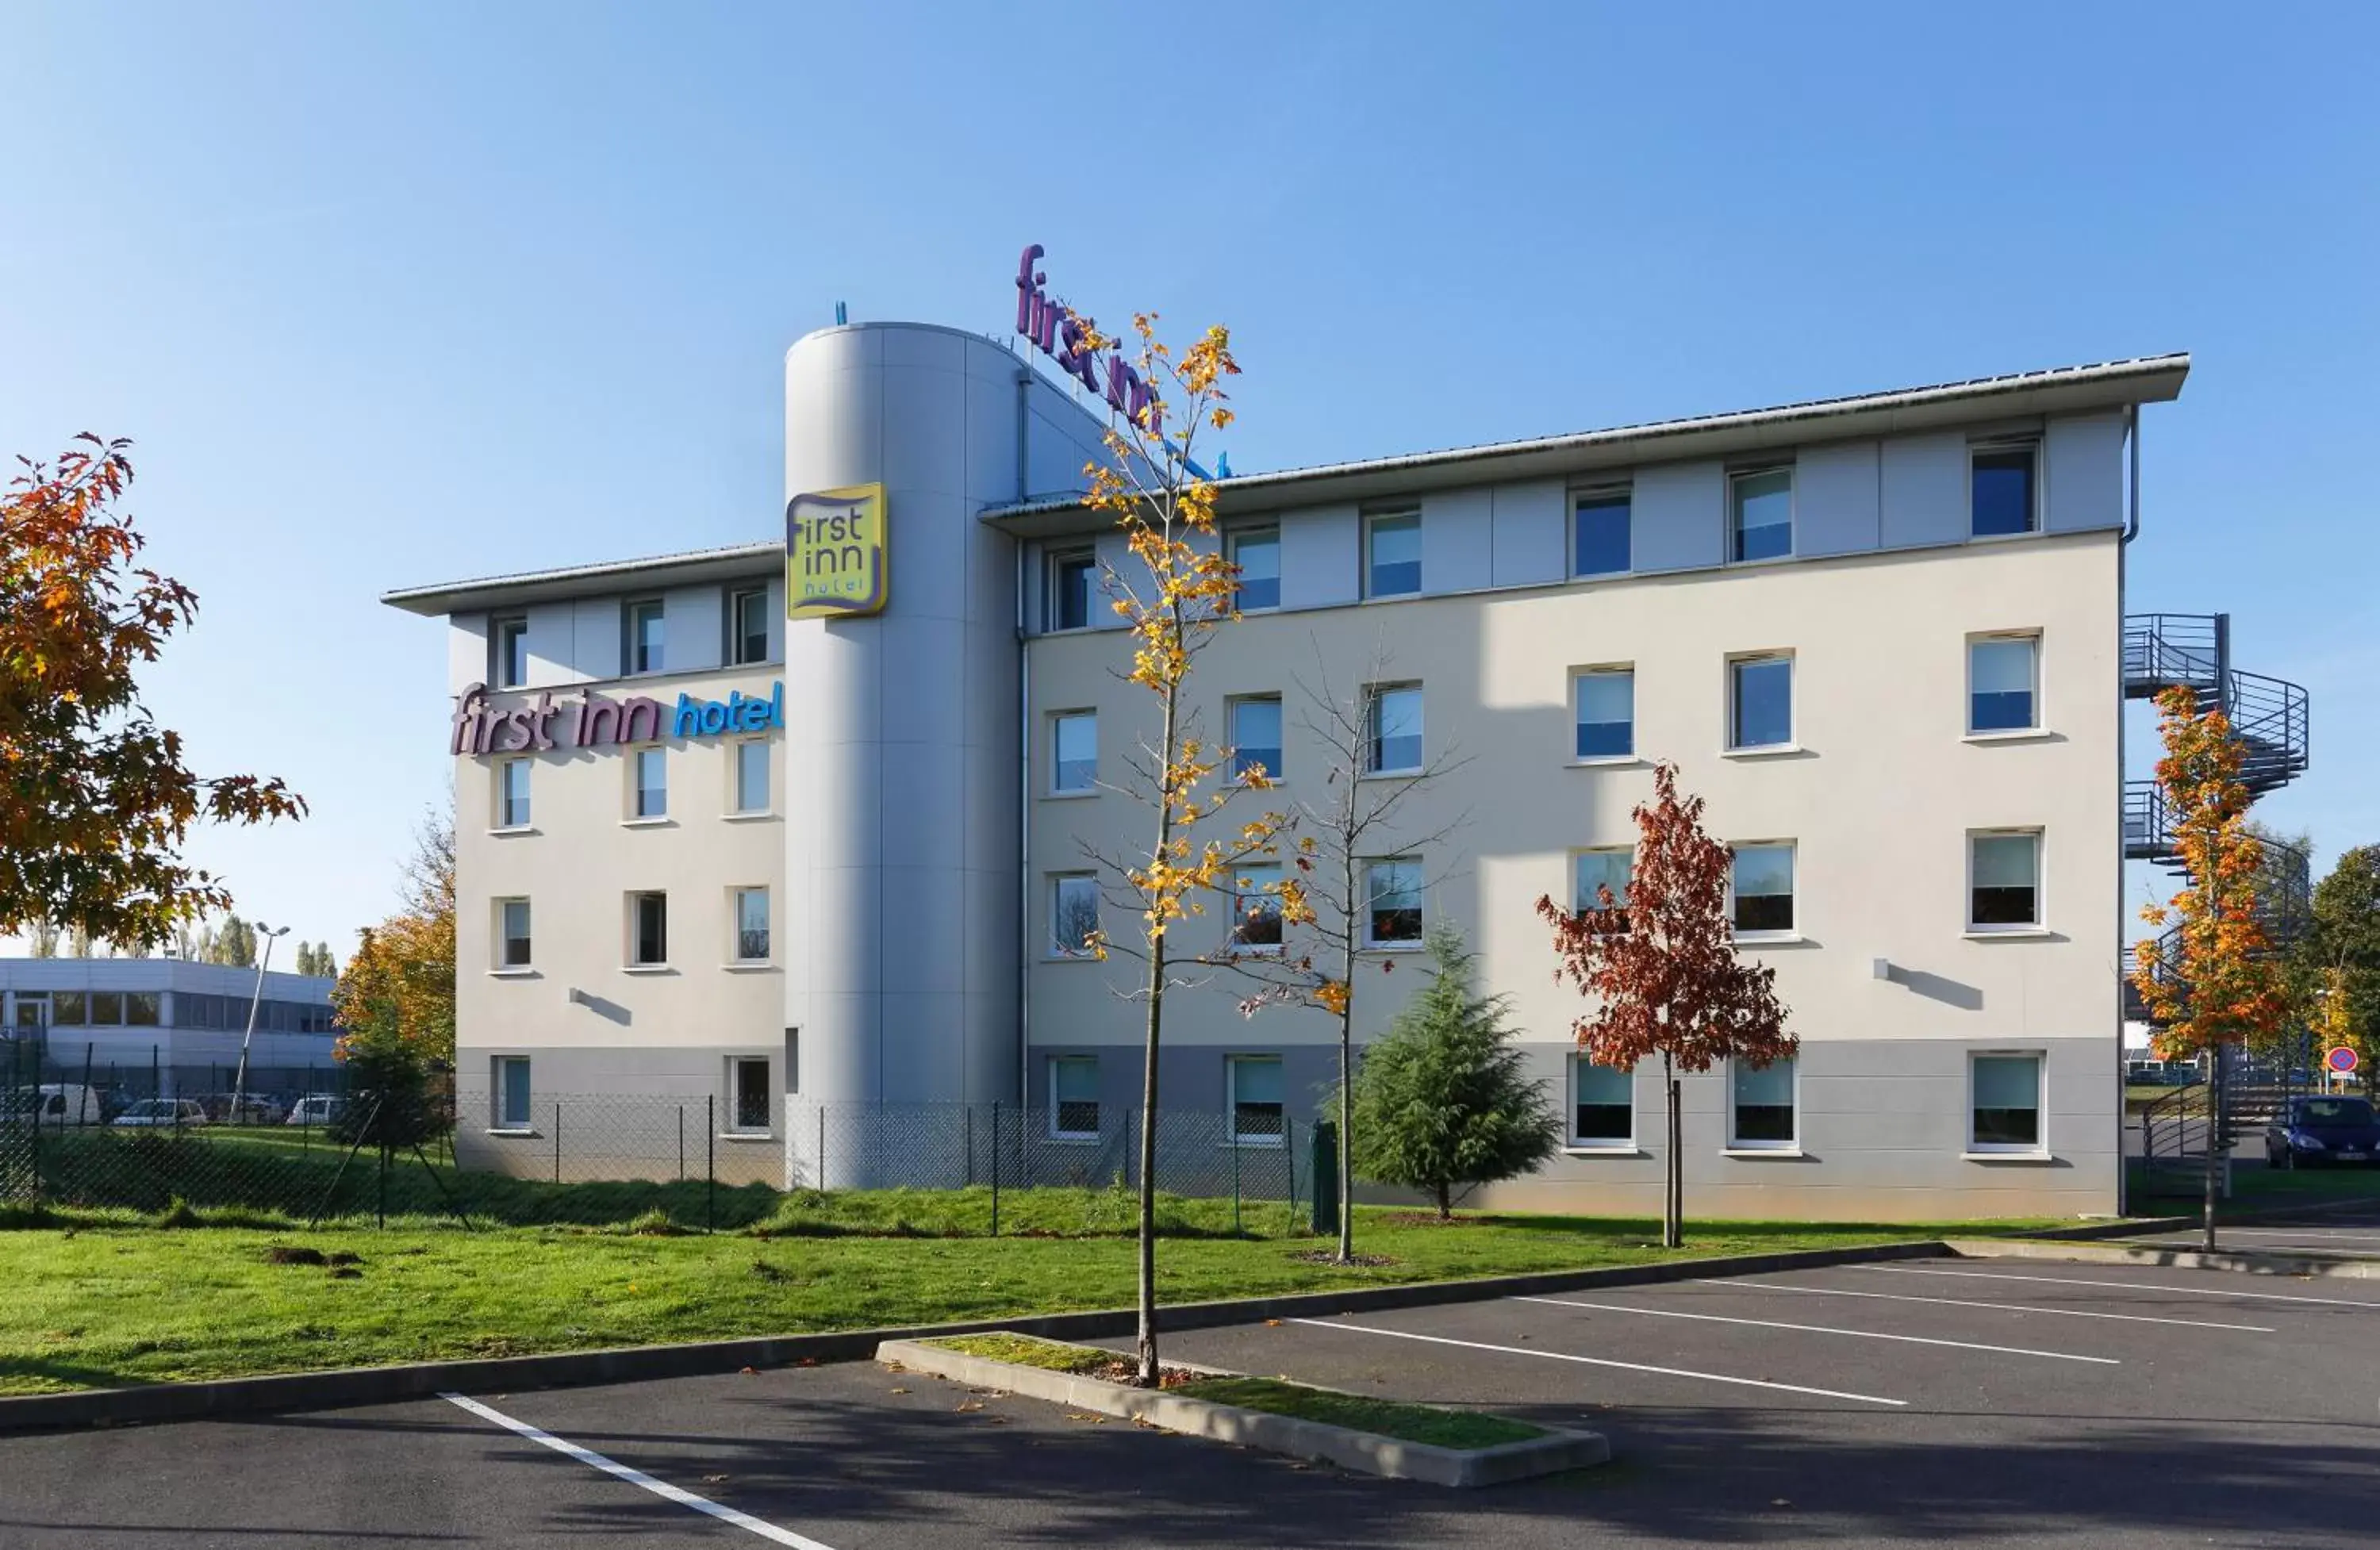 Property Building in First Inn Hotel Paris Sud Les Ulis